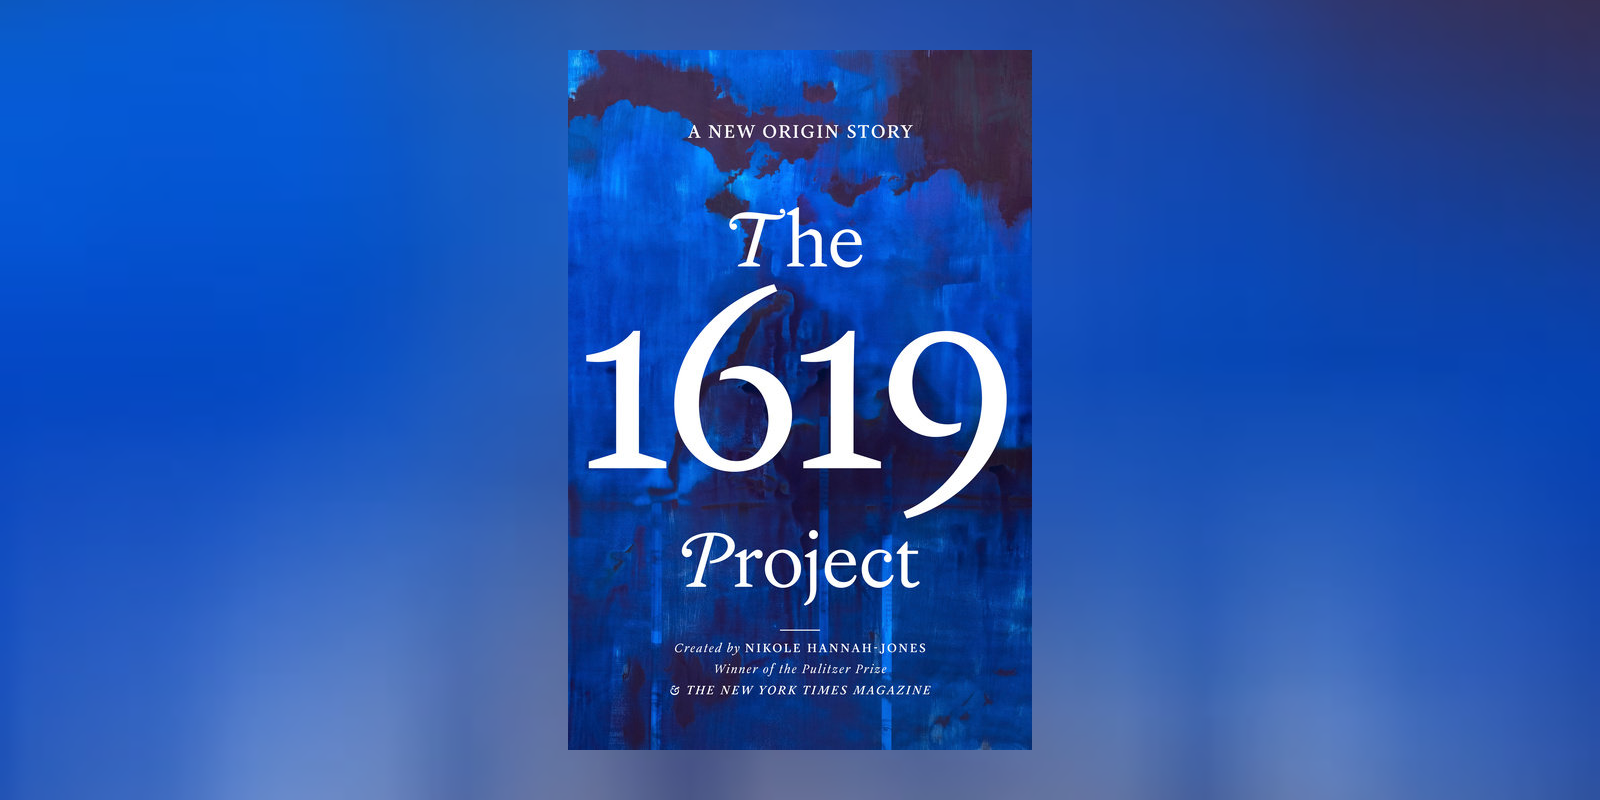 Bookshop.org Launches Donation Platform to Celebrate Publication of <i>The 1619 Project: A New Origin Story</i>